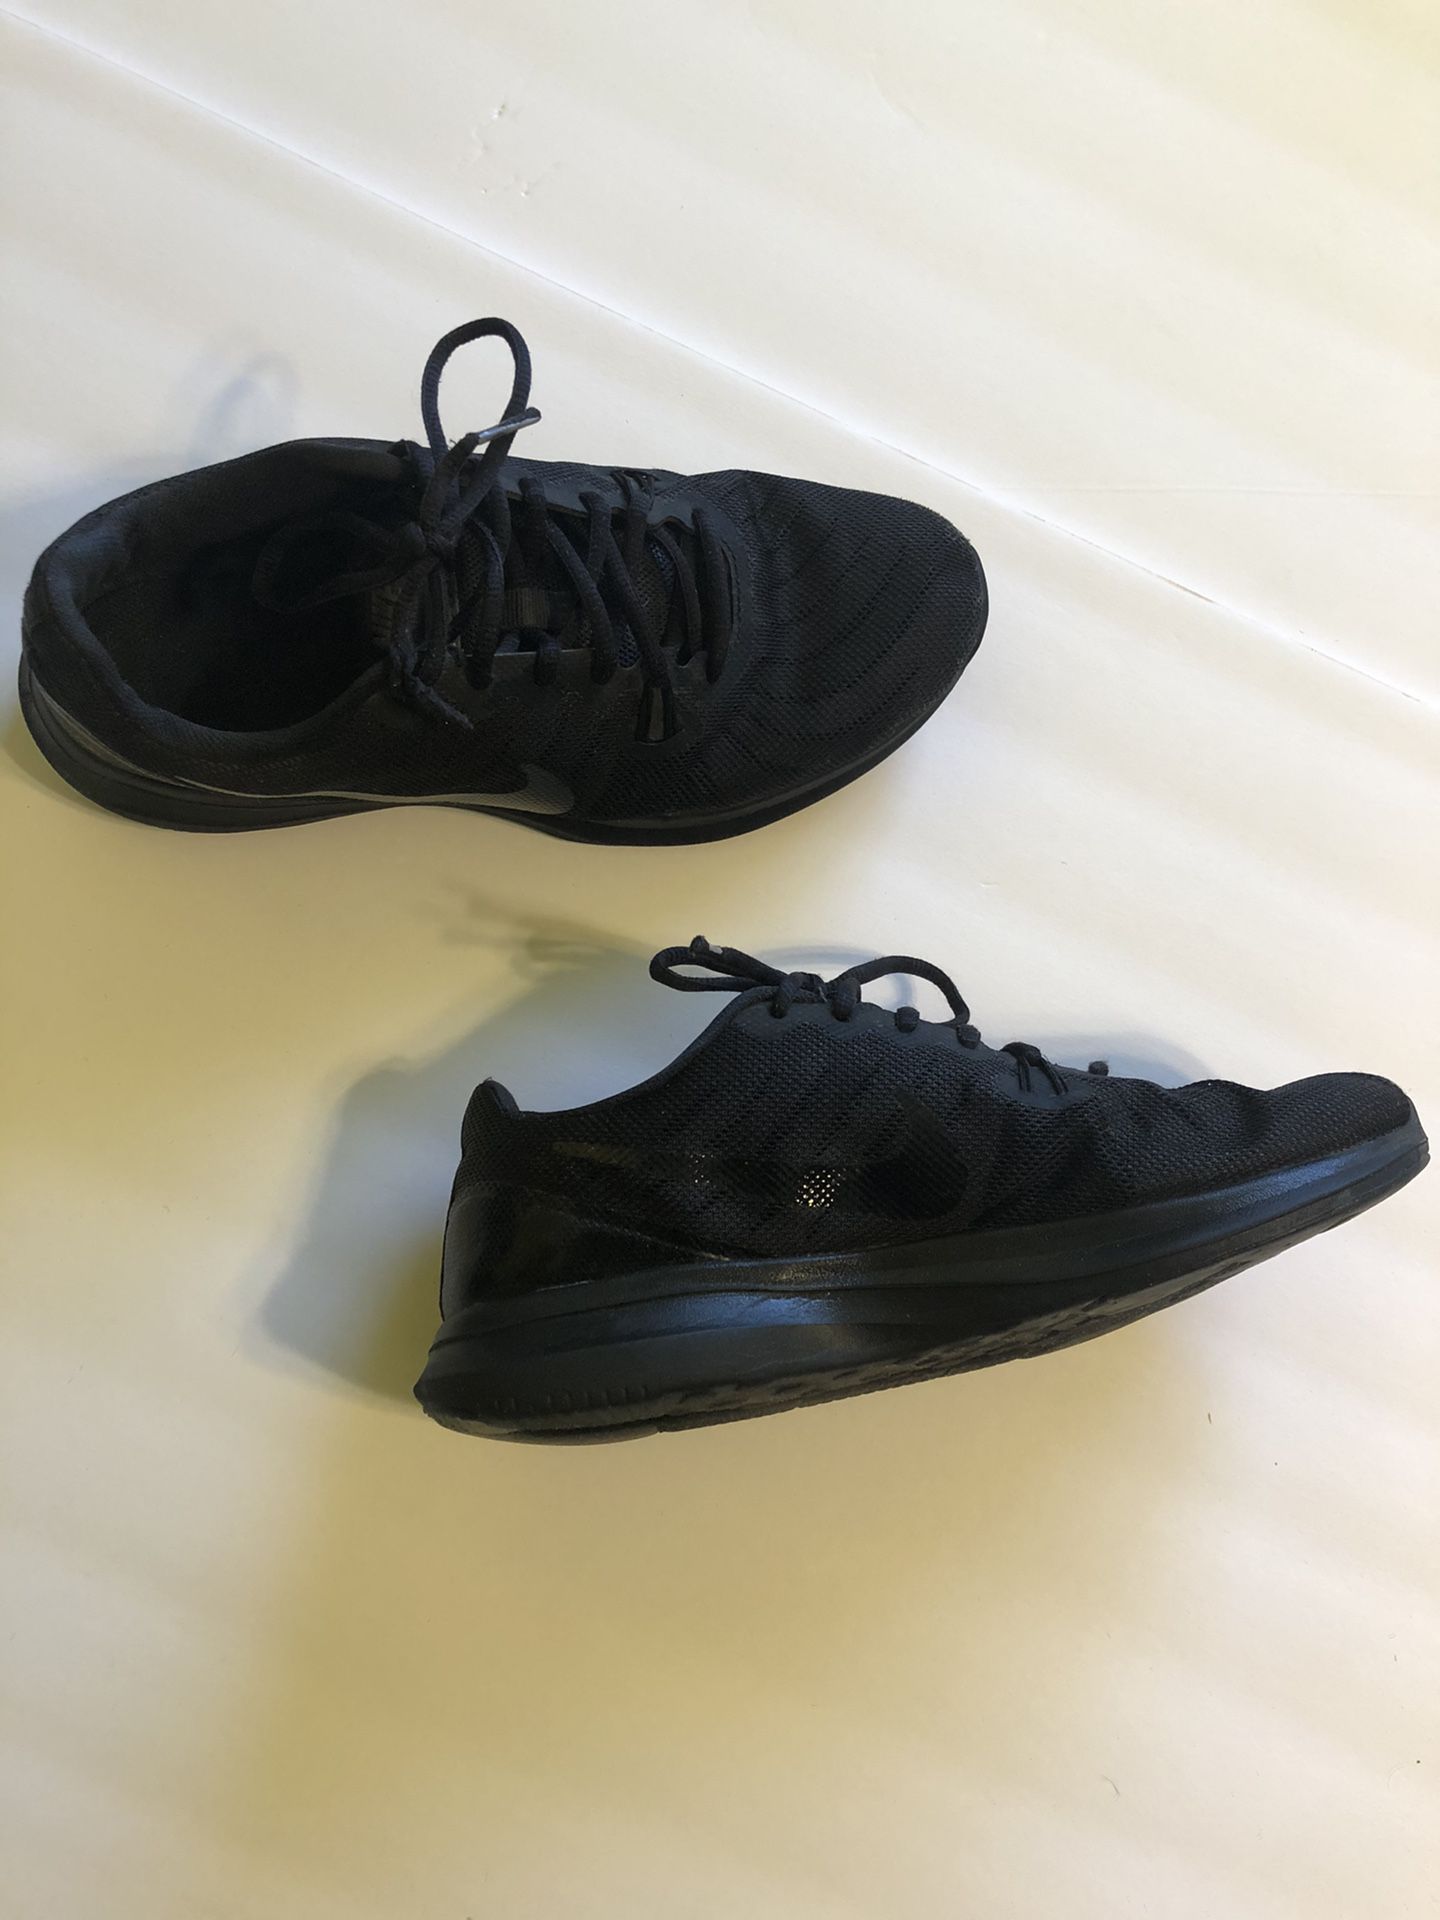 Mens Nike Shoes Size 8.5. Returns Accepted.